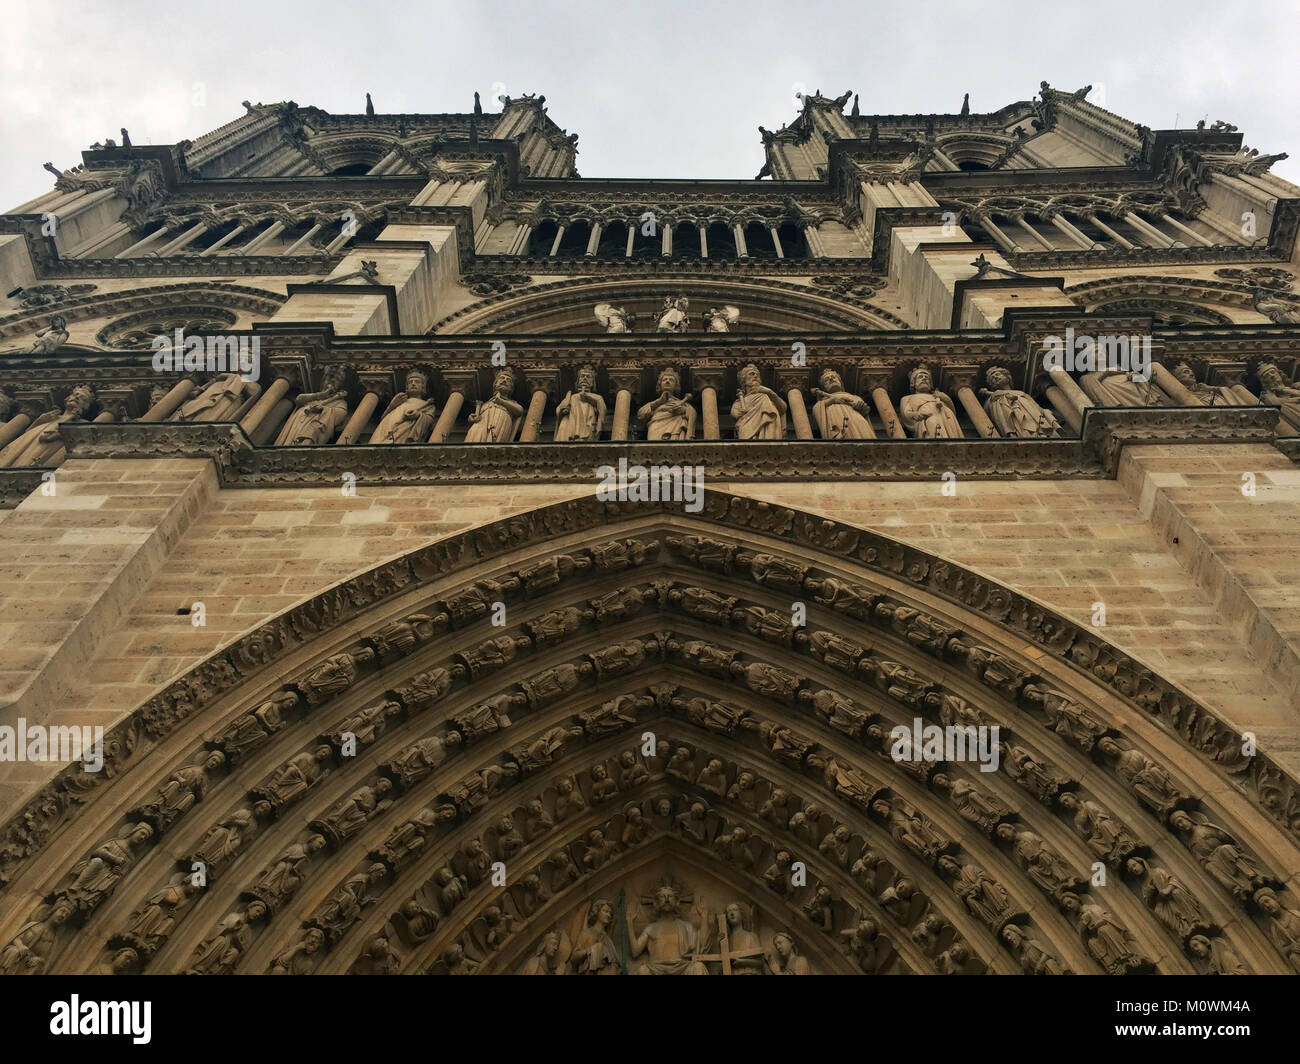 Worms eye view of the front facade of the Notre Dame Cathedral in Paris, France Stock Photo